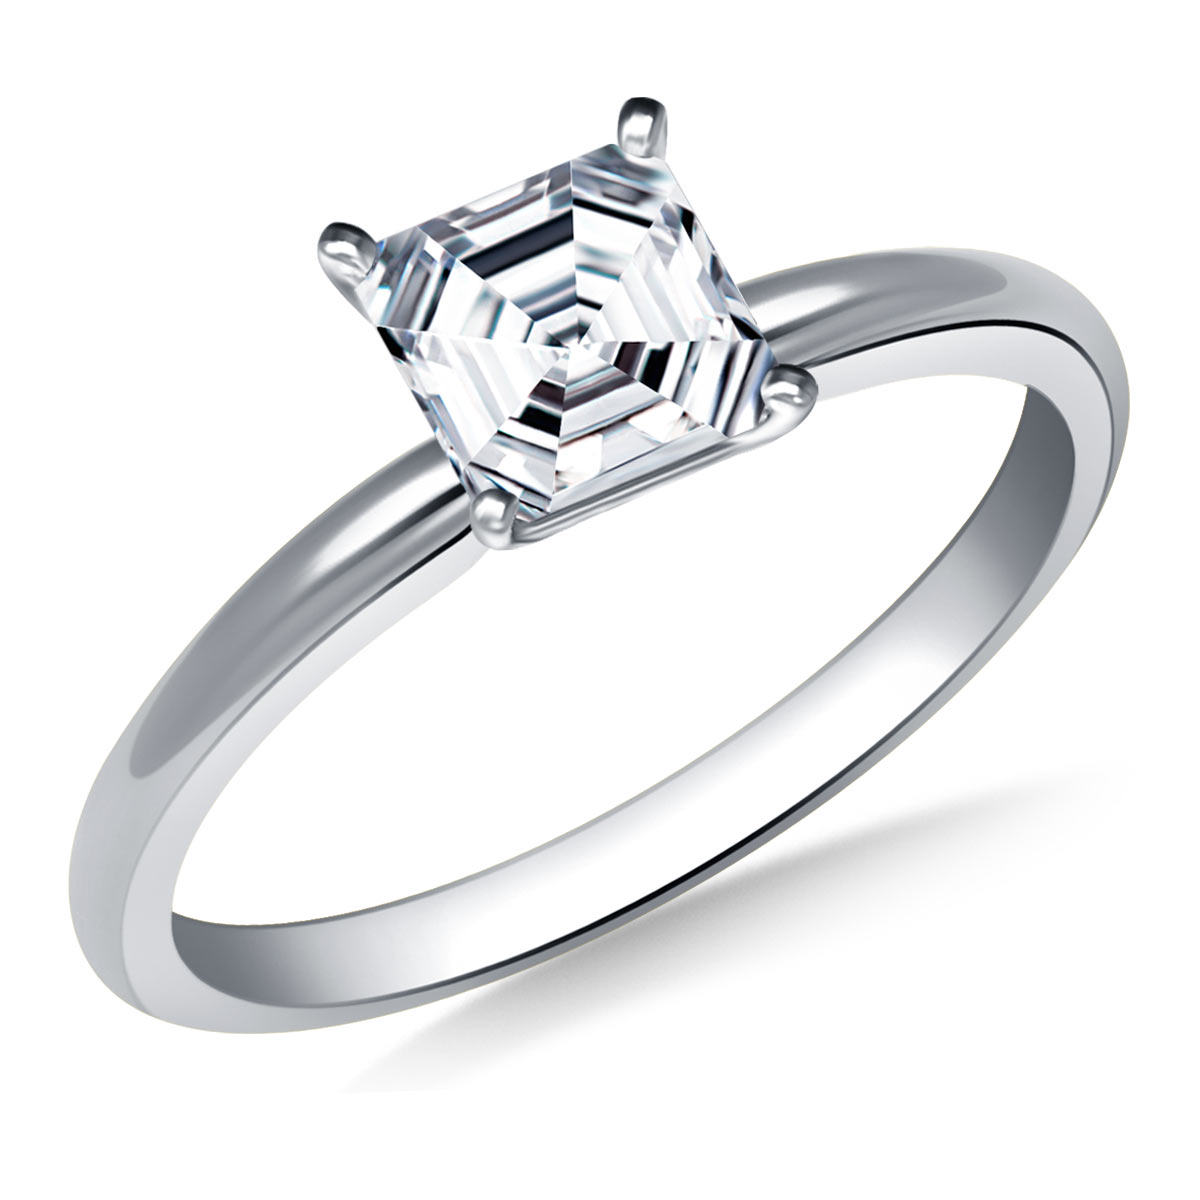 Classic Solitaire Diamond Engagement Ring in 14K White Gold (2.0 mm)